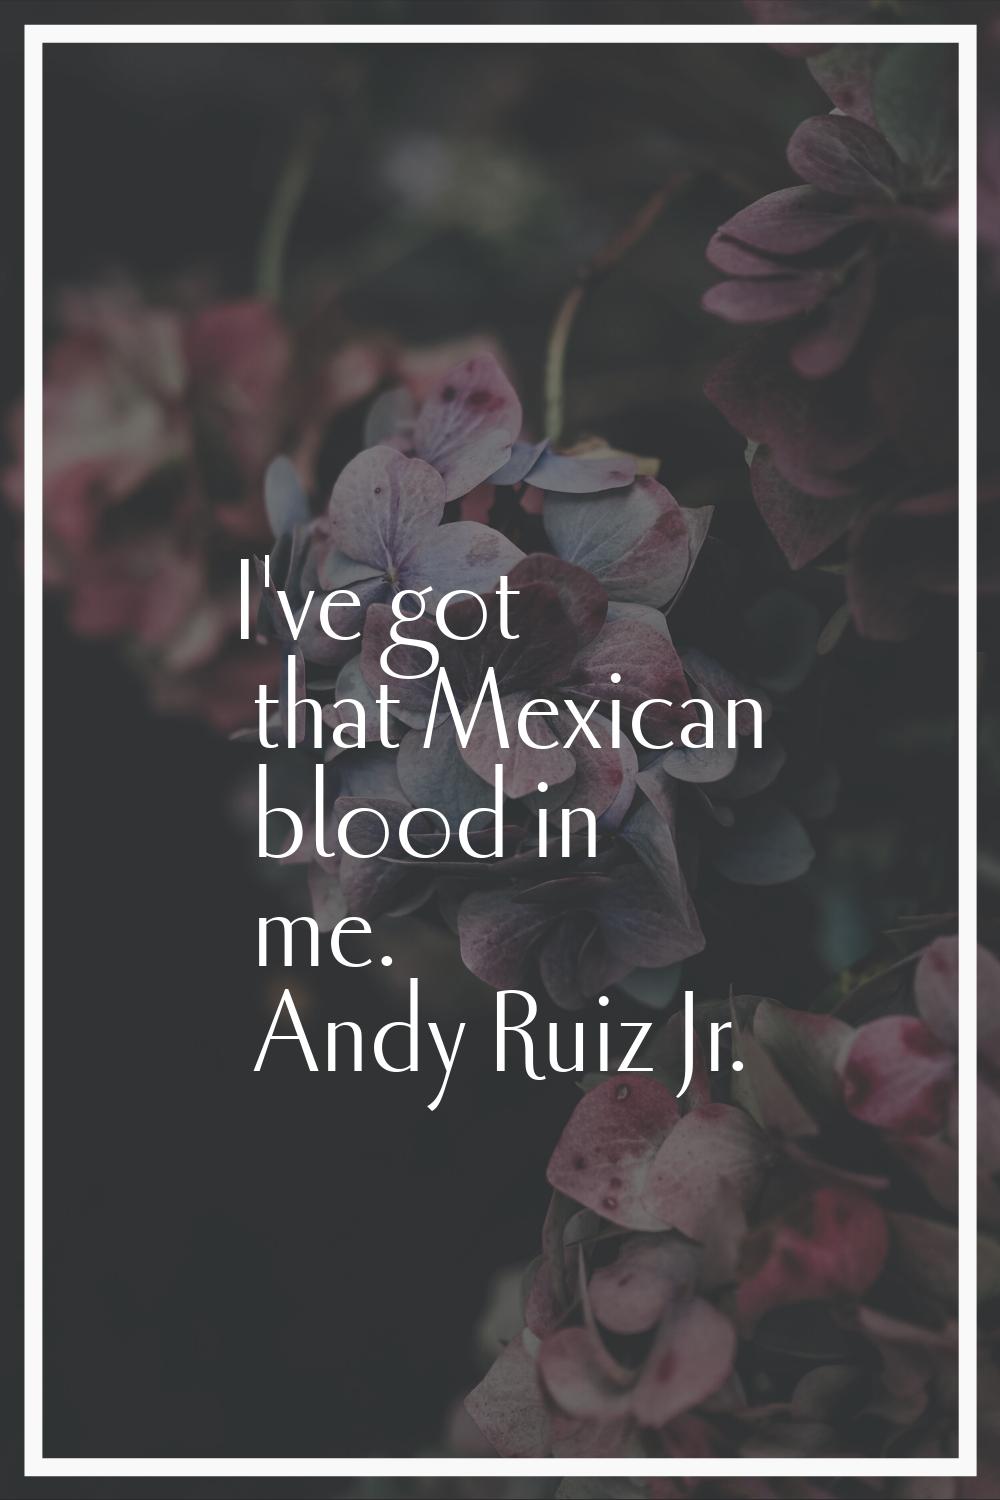 I've got that Mexican blood in me.